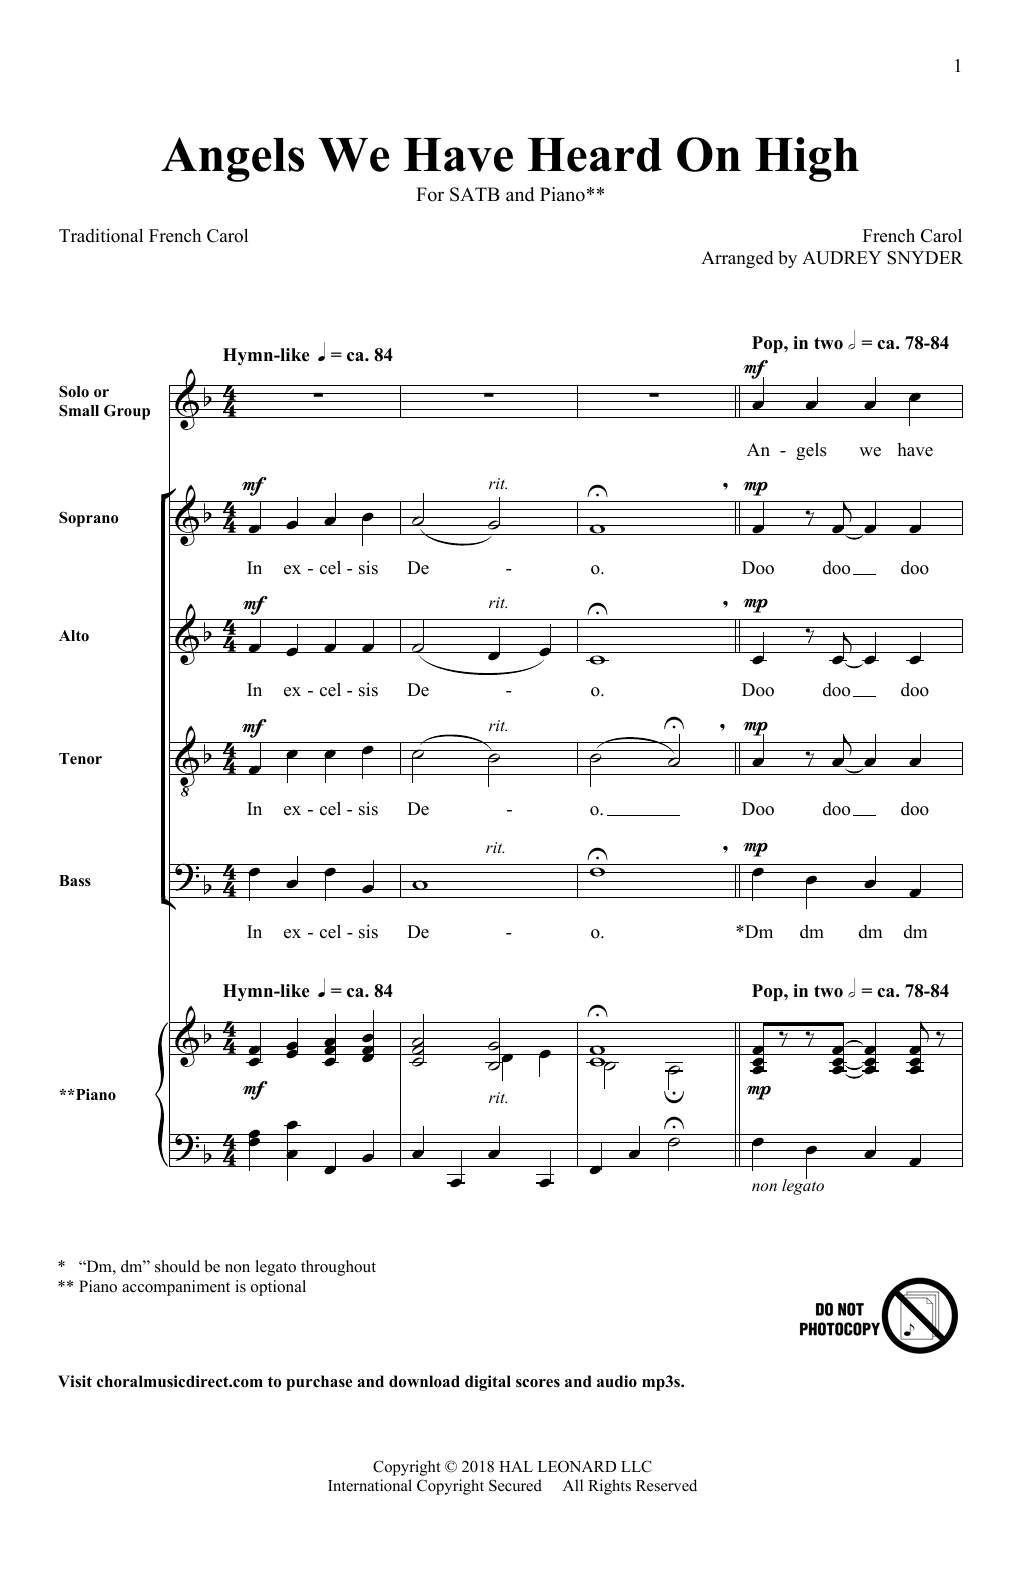 Download Audrey Snyder Angels We Have Heard On High Sheet Music